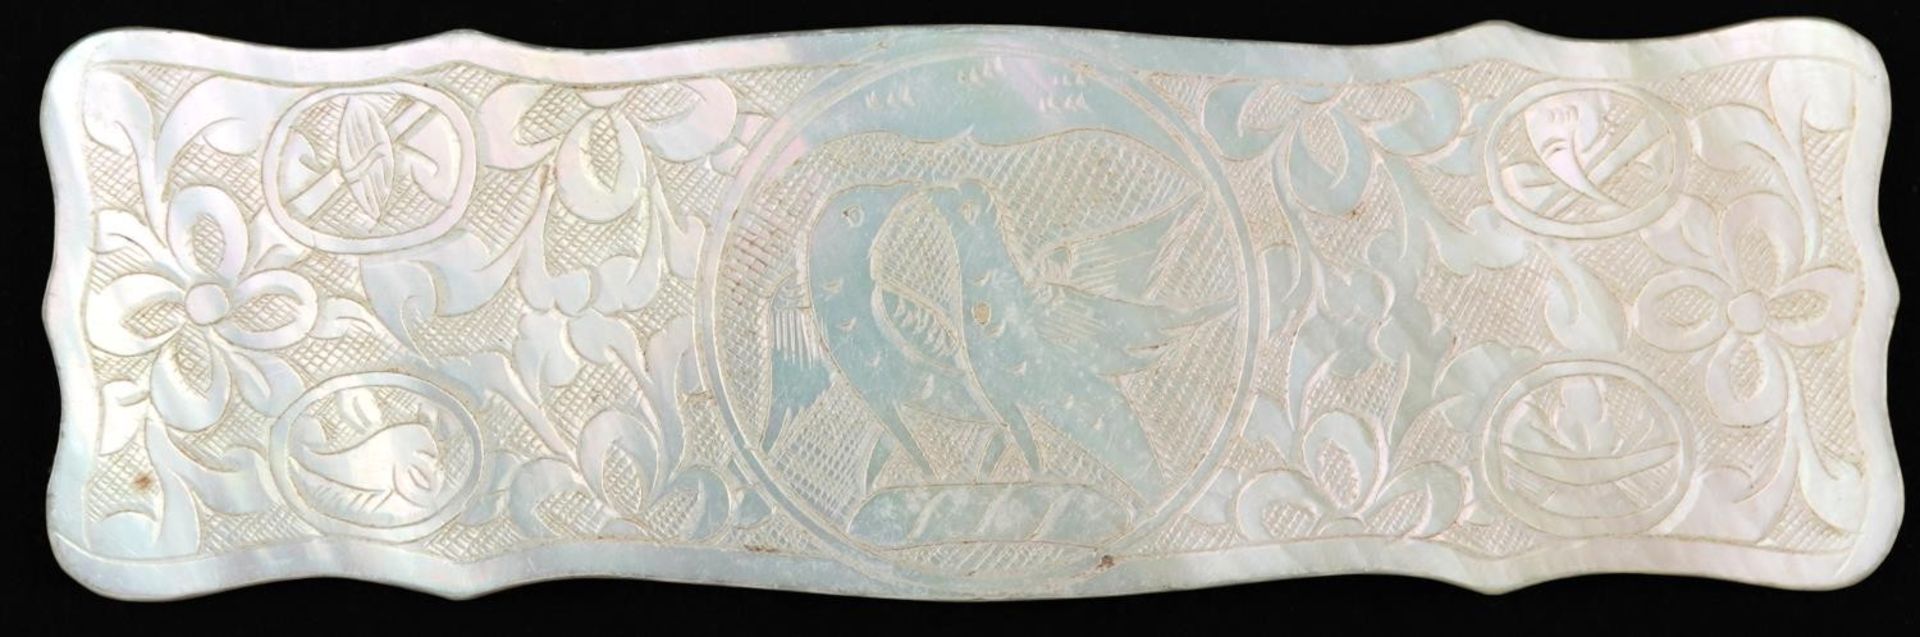 Good collection of Chinese Canton mother of pearl gaming counters carved with figures and flowers, - Image 30 of 30